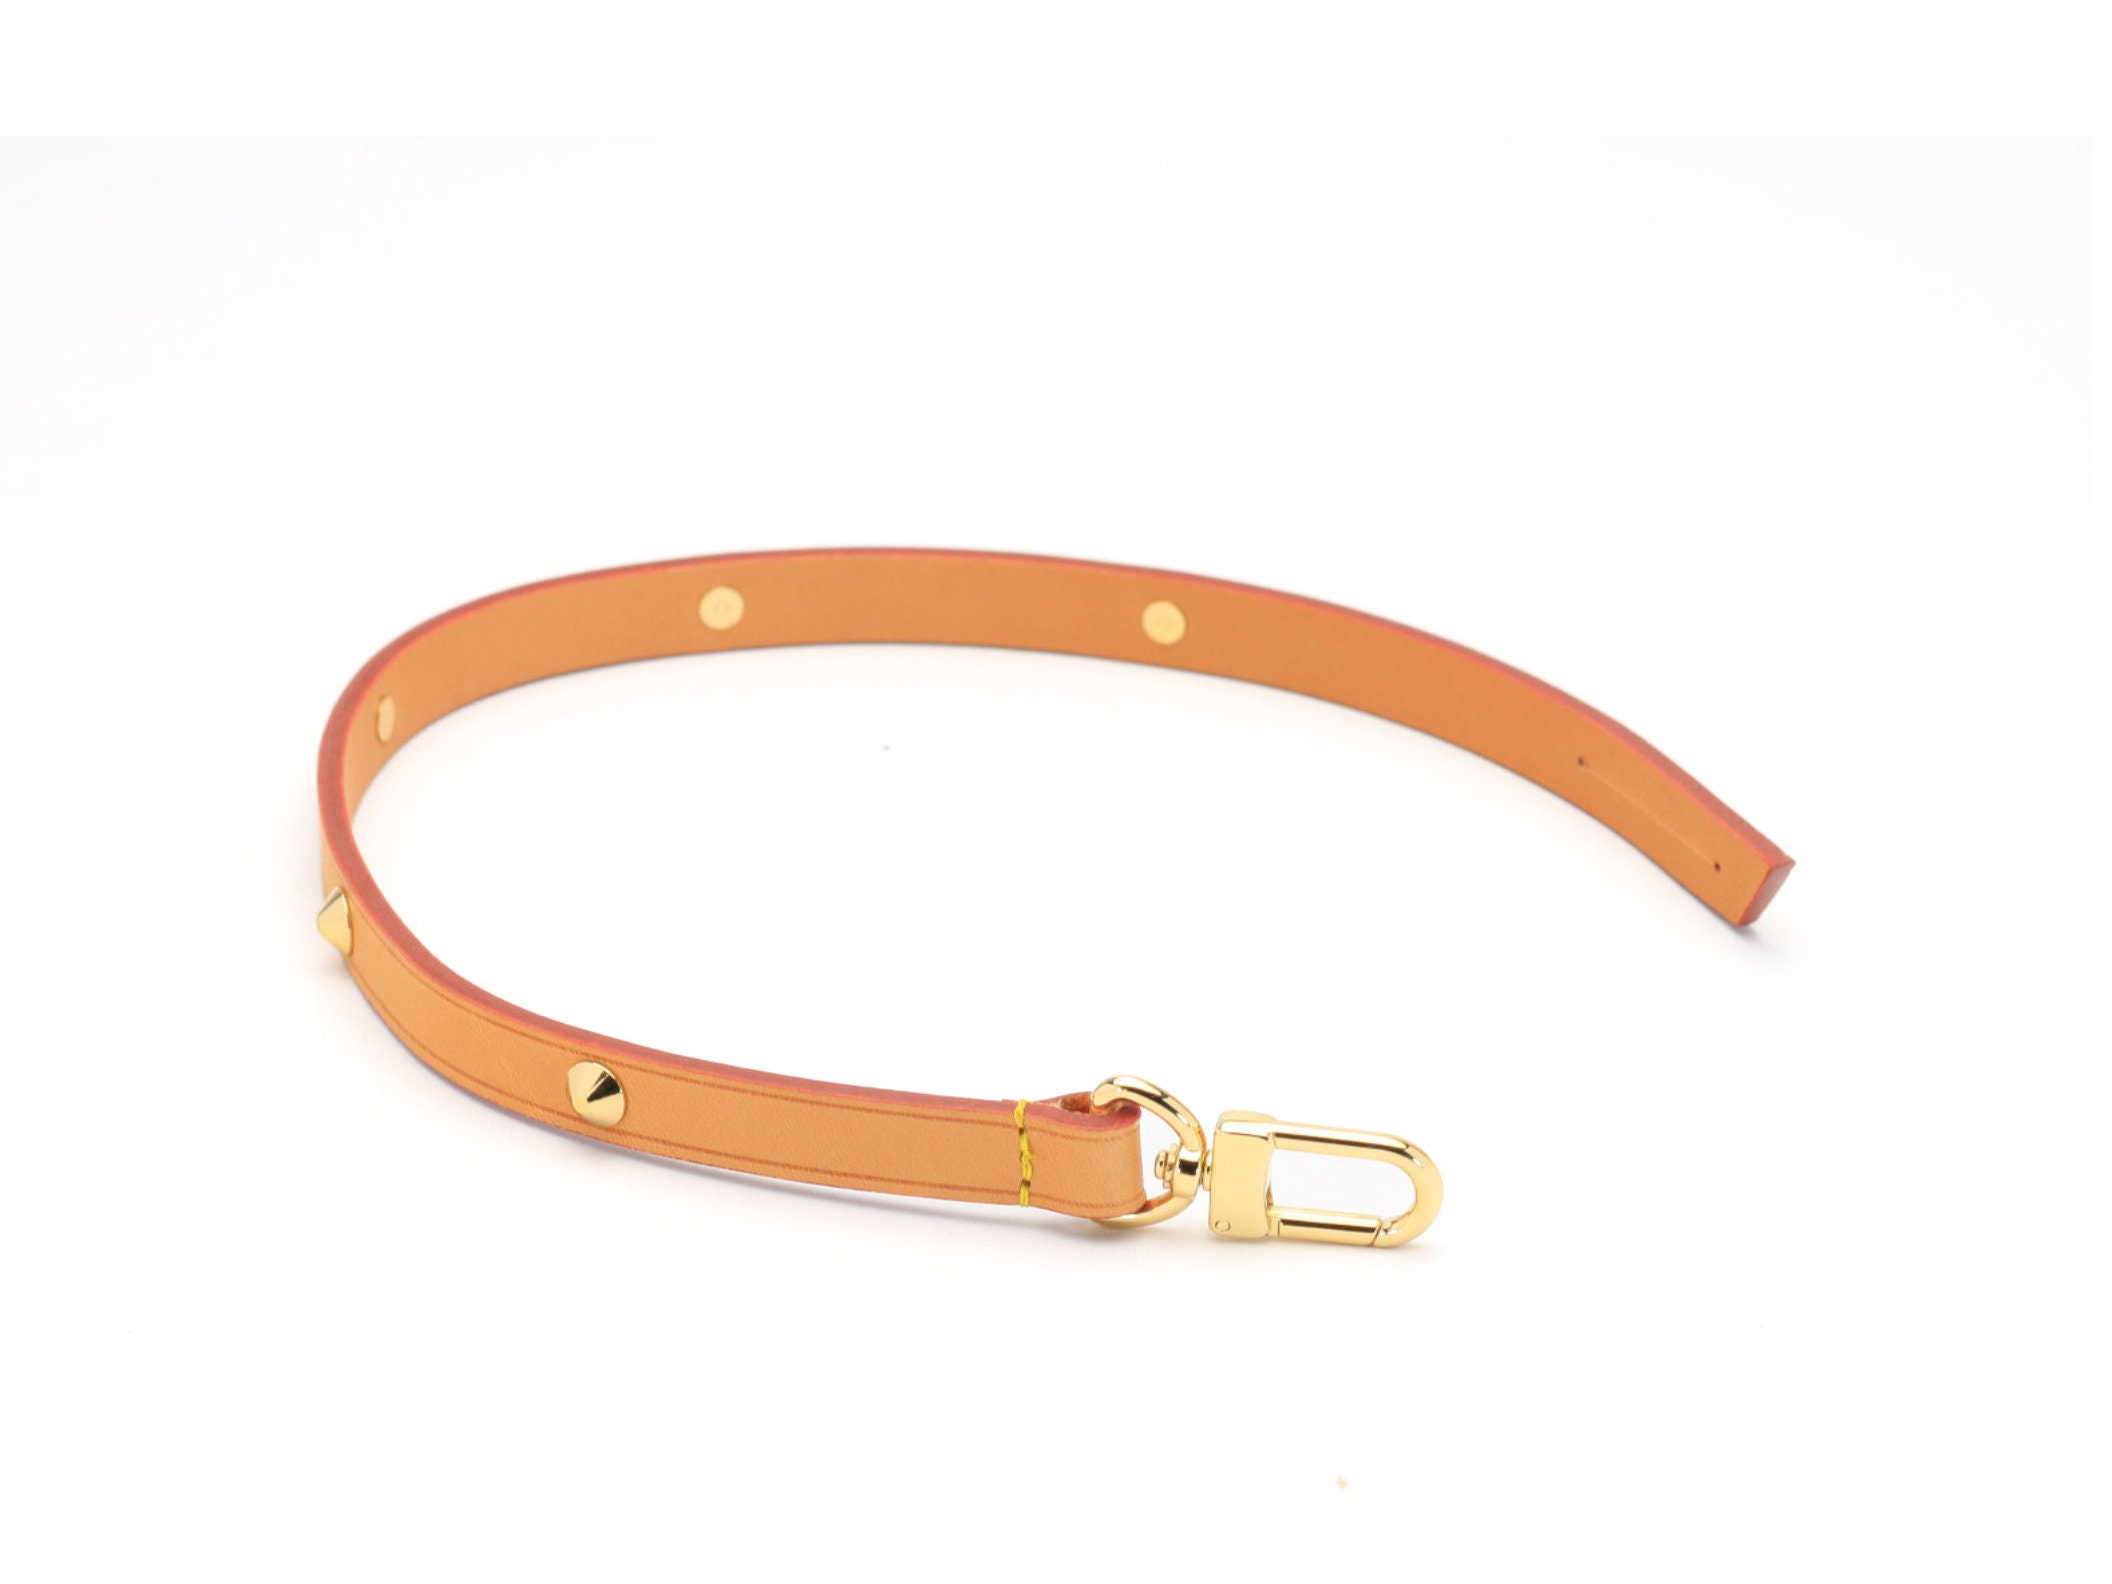 Vachetta Bag Strap, Real Leather Replacement Strap for Designer Purse, Fine Leather  Strap With Stitching & Pull-through Attachment Tab 